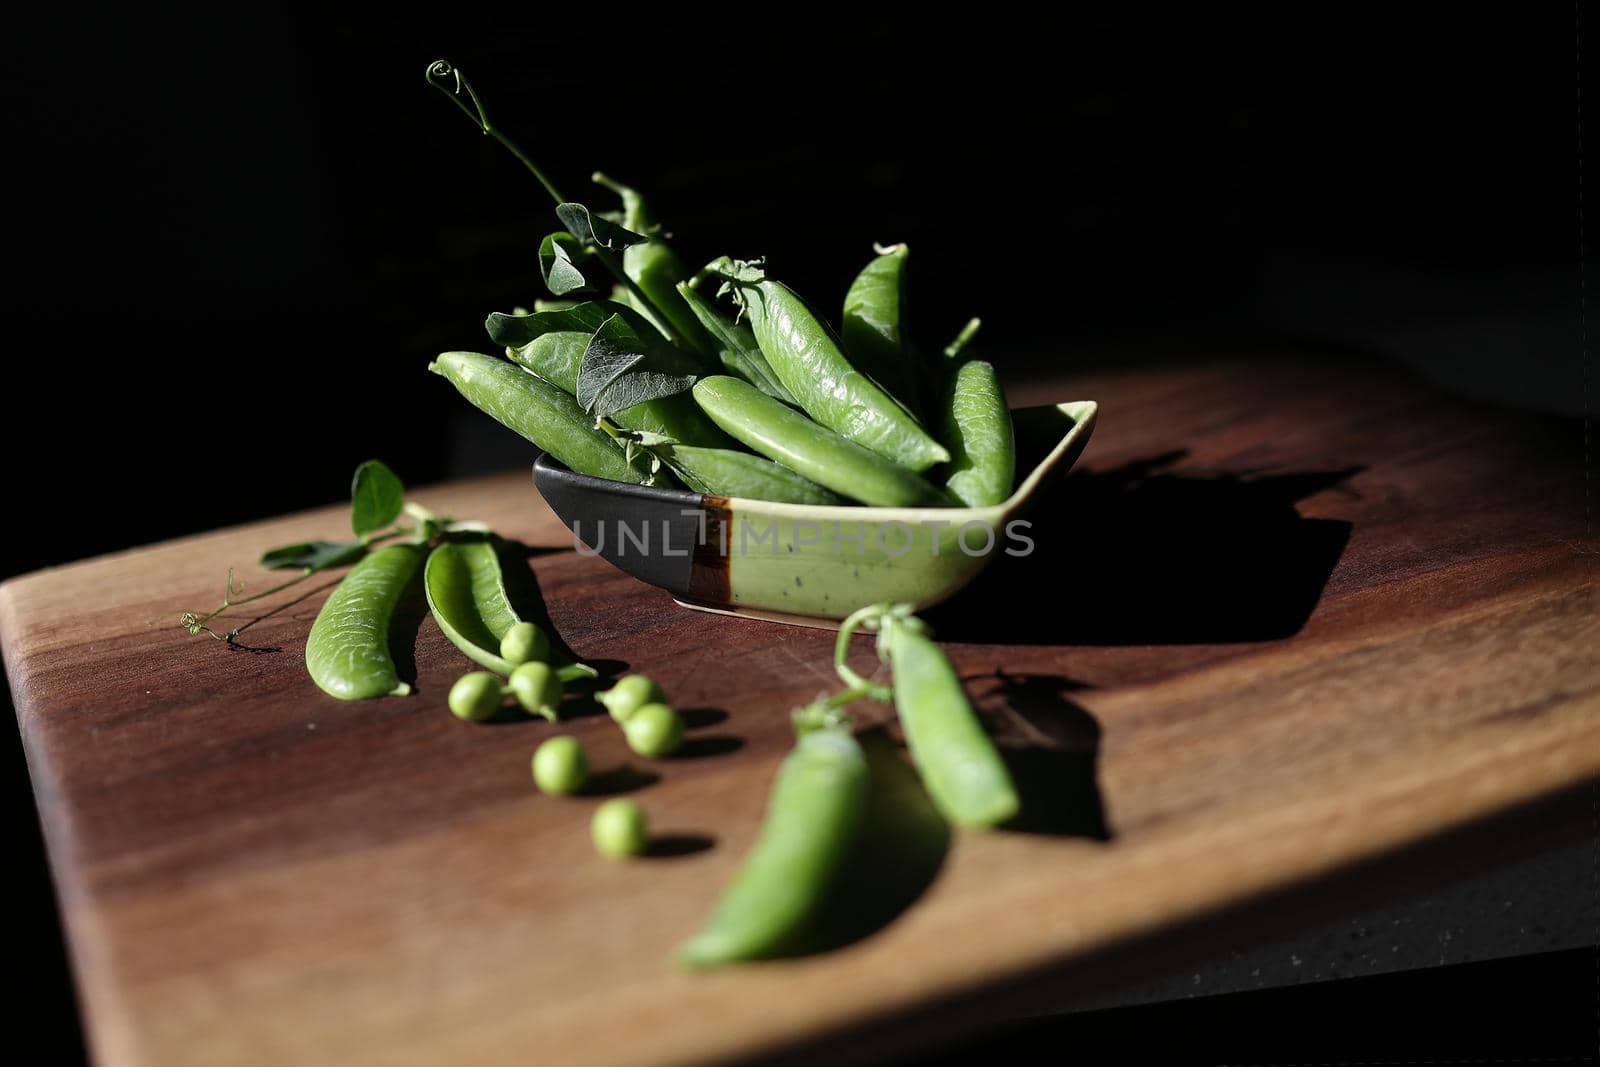 Delicious ripe green peas lie in a small ceramic bowl and on a wooden table. Dark background, rustic style by Proxima13